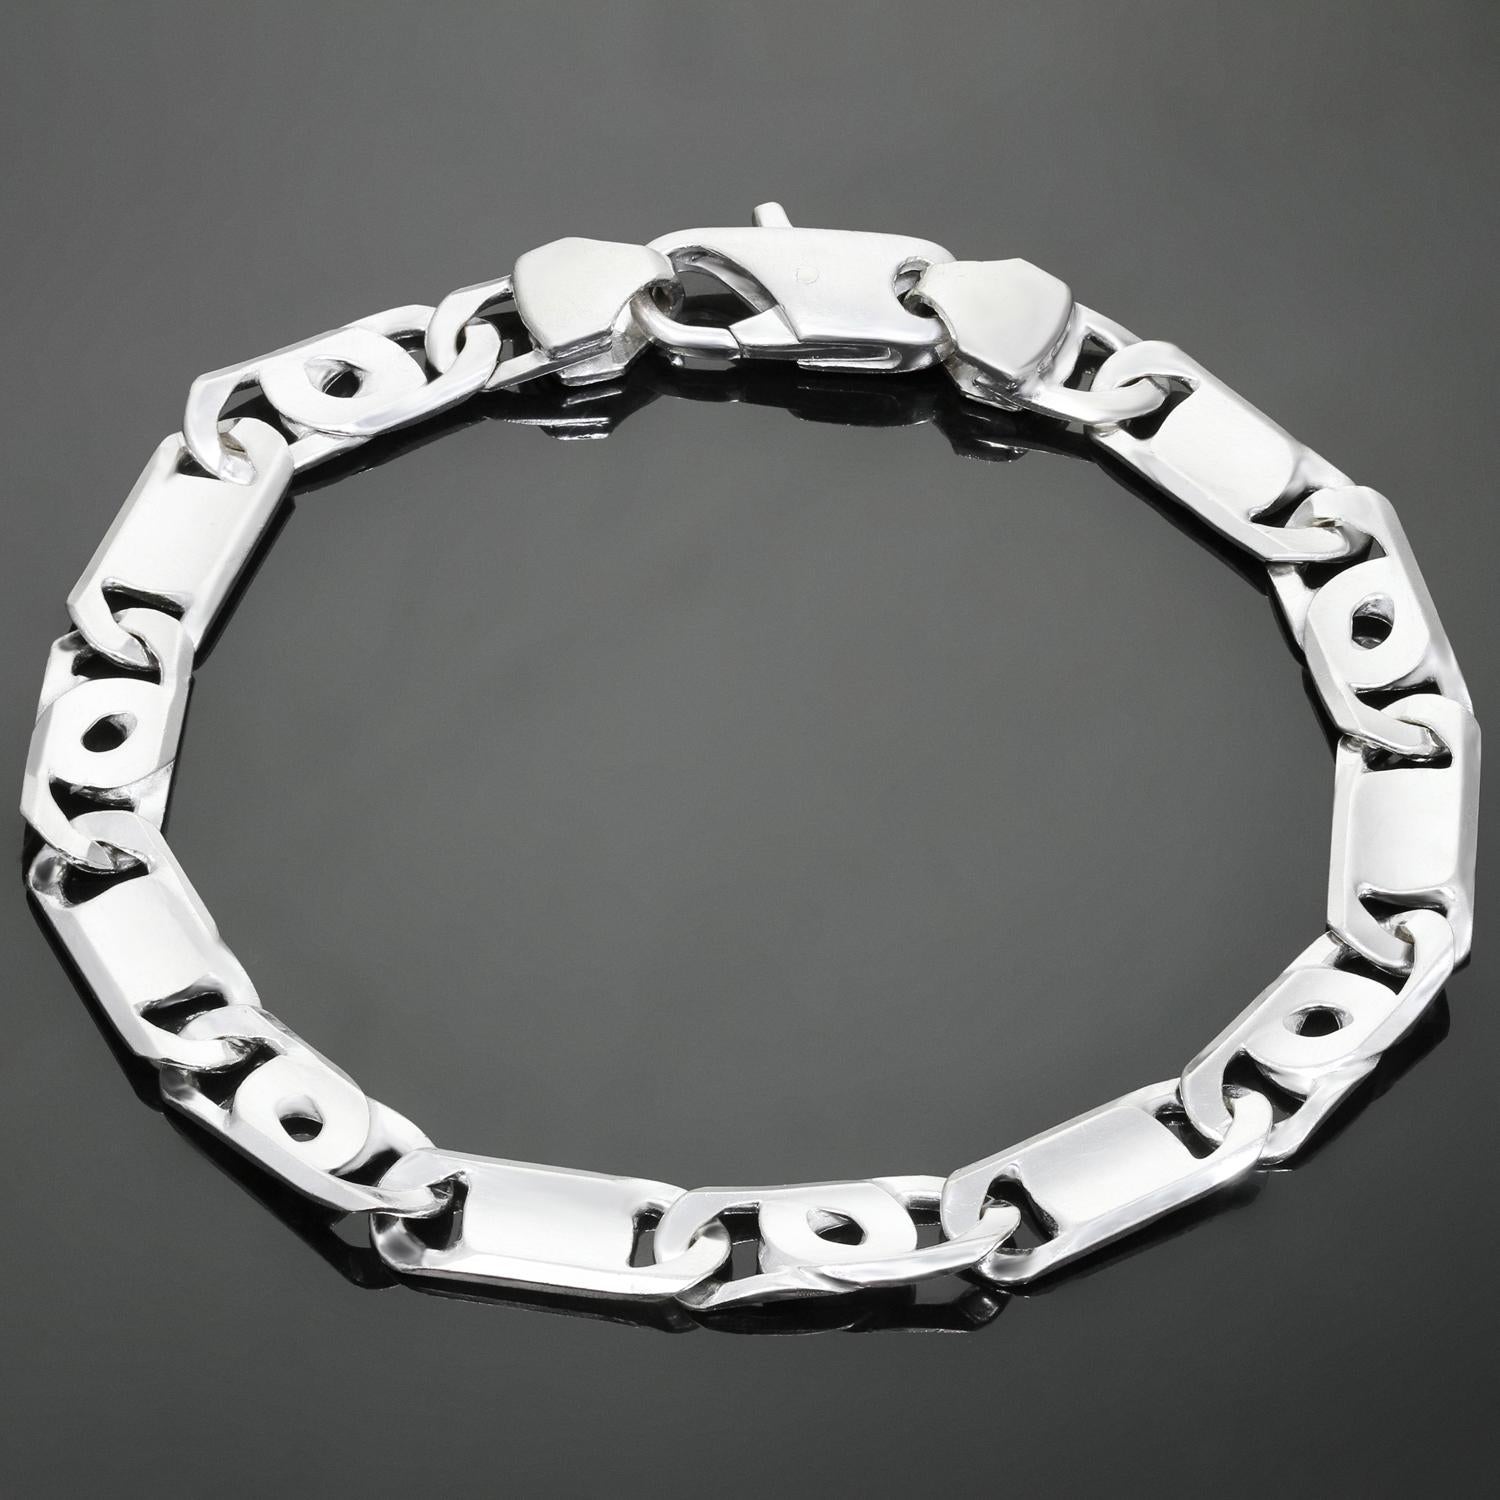 This classic unisex bracelet features flat links crafted in 18k white gold. Made in Italy circa 1990s. Measurements: 0.31